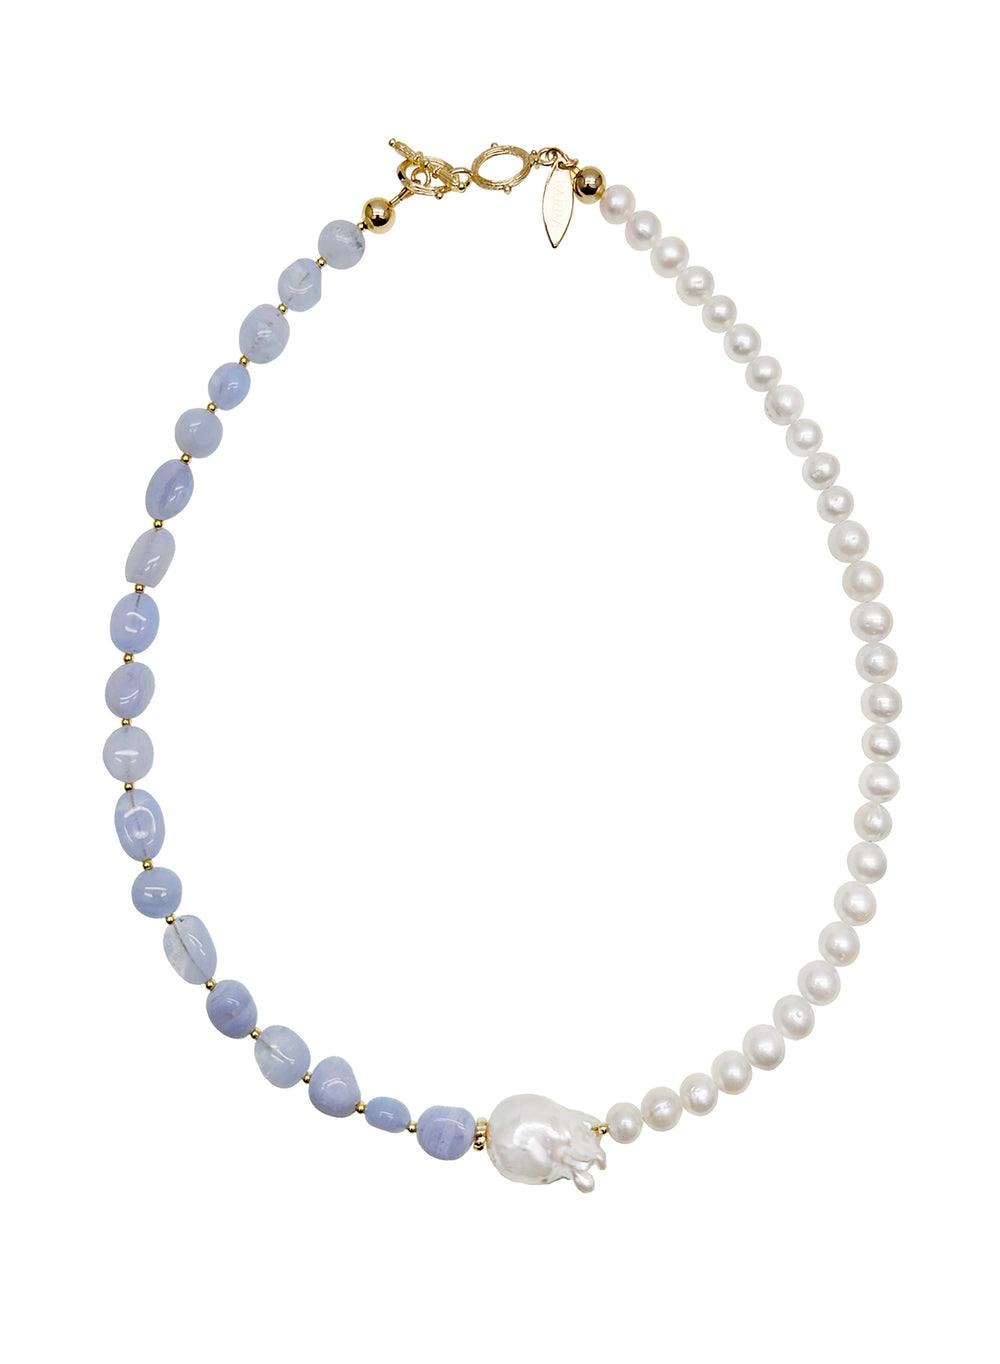 White Freshwater Pearls and Blue Lace Agate Choker Necklace JN032 - FARRA